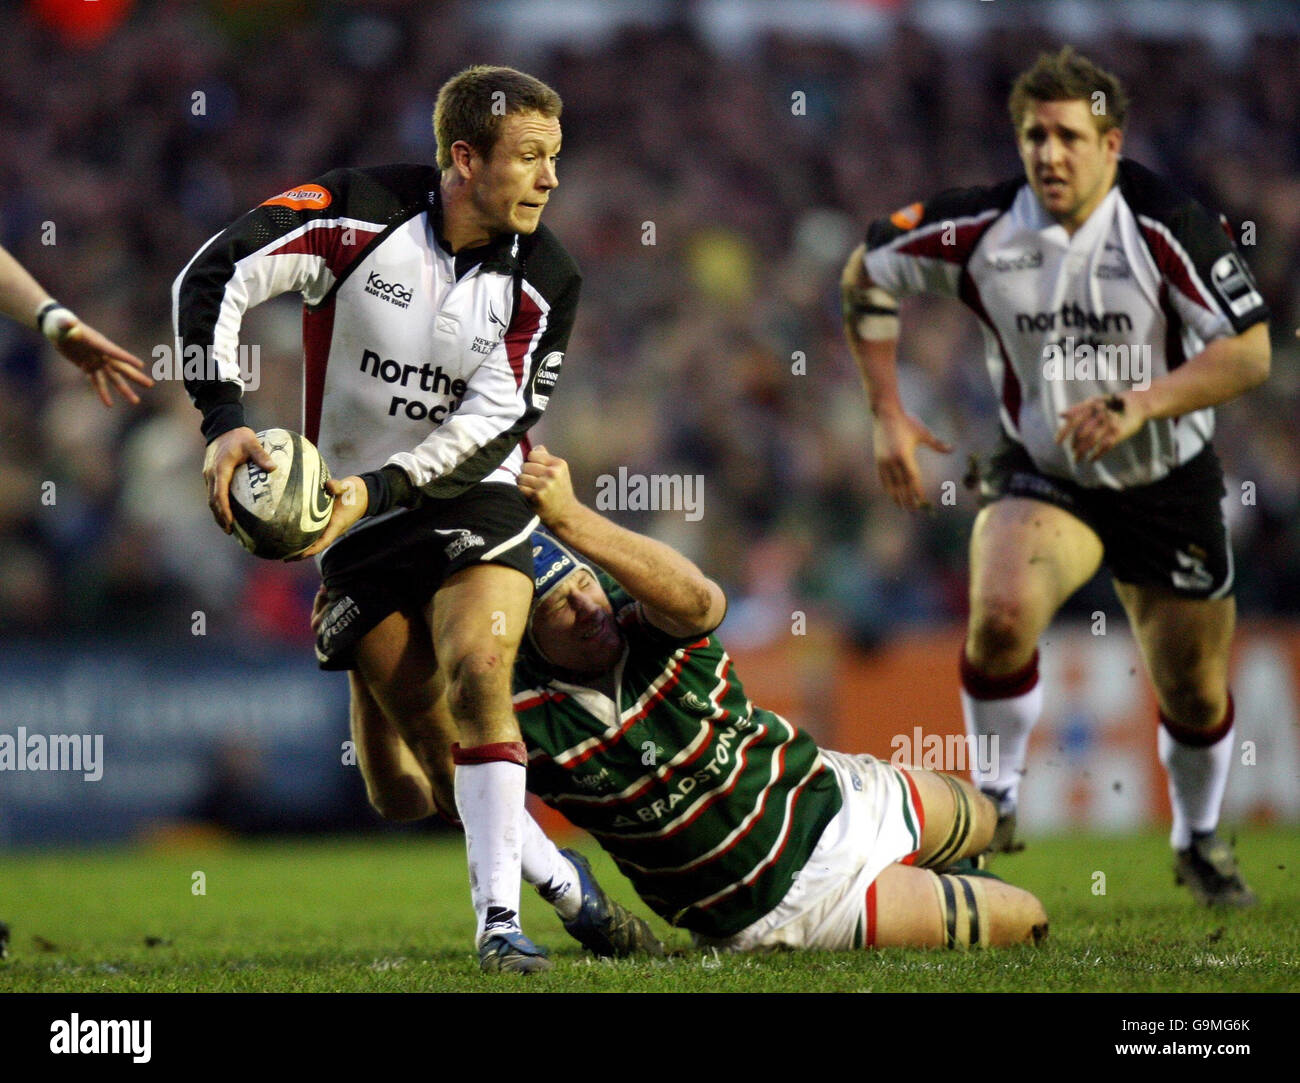 Rugby Union - Guinness Premiership - Leicester Tigers v Newcastle Falcons - Welford Road. Newcastle's Jonny Wilkinson is tackled by Leicester's Jordan Crane during the Guinness Premiership match at Welford Road, Leicester. Stock Photo